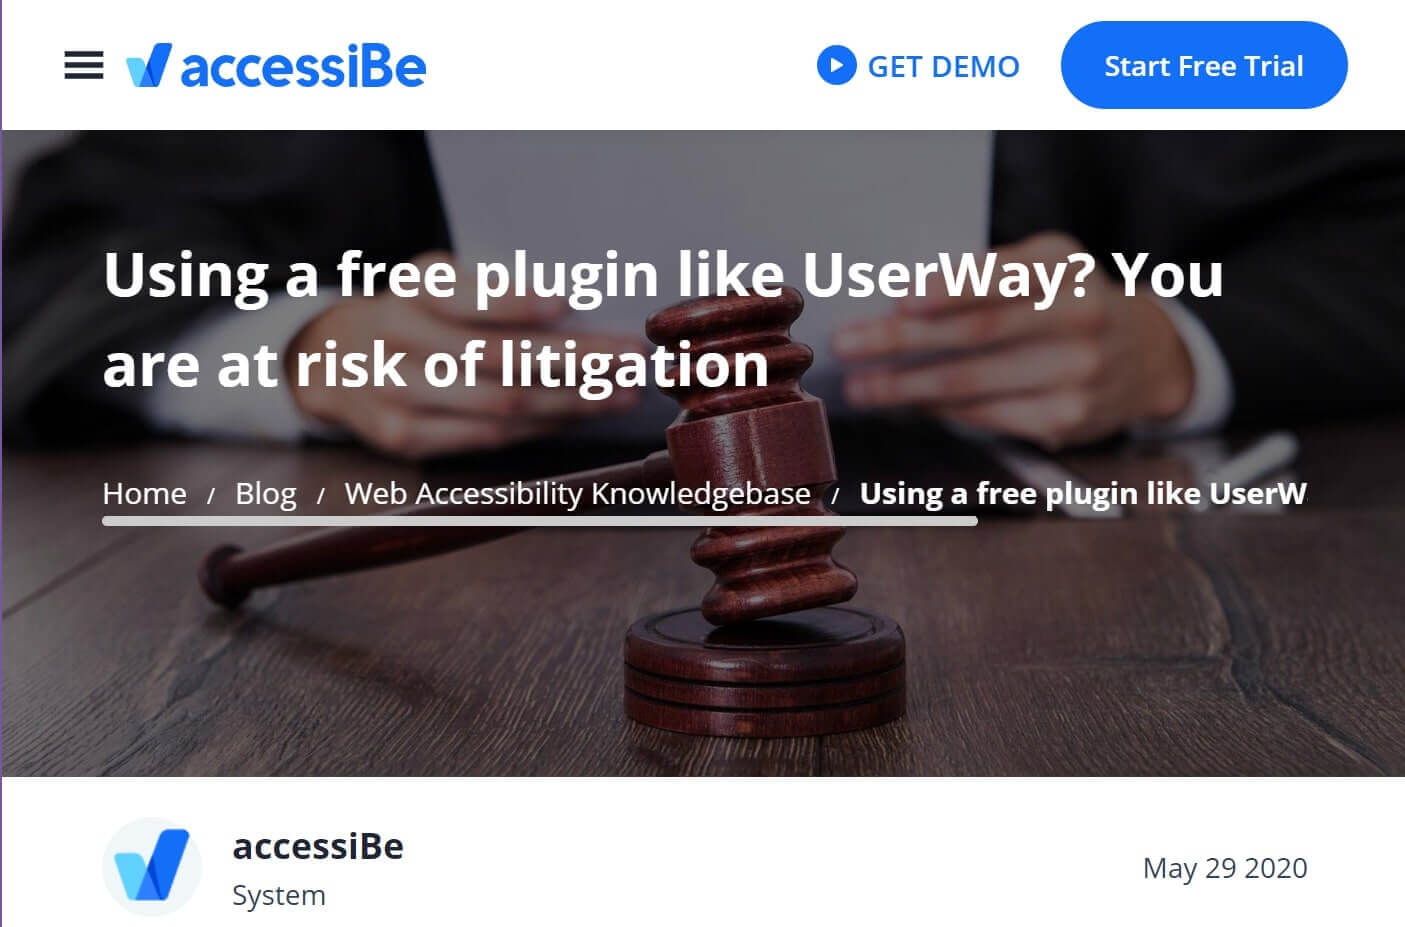 Post on the accessiBe site titled “Using a free plugin like UserWay? You are at risk of litigation” dated 29 May 2020.